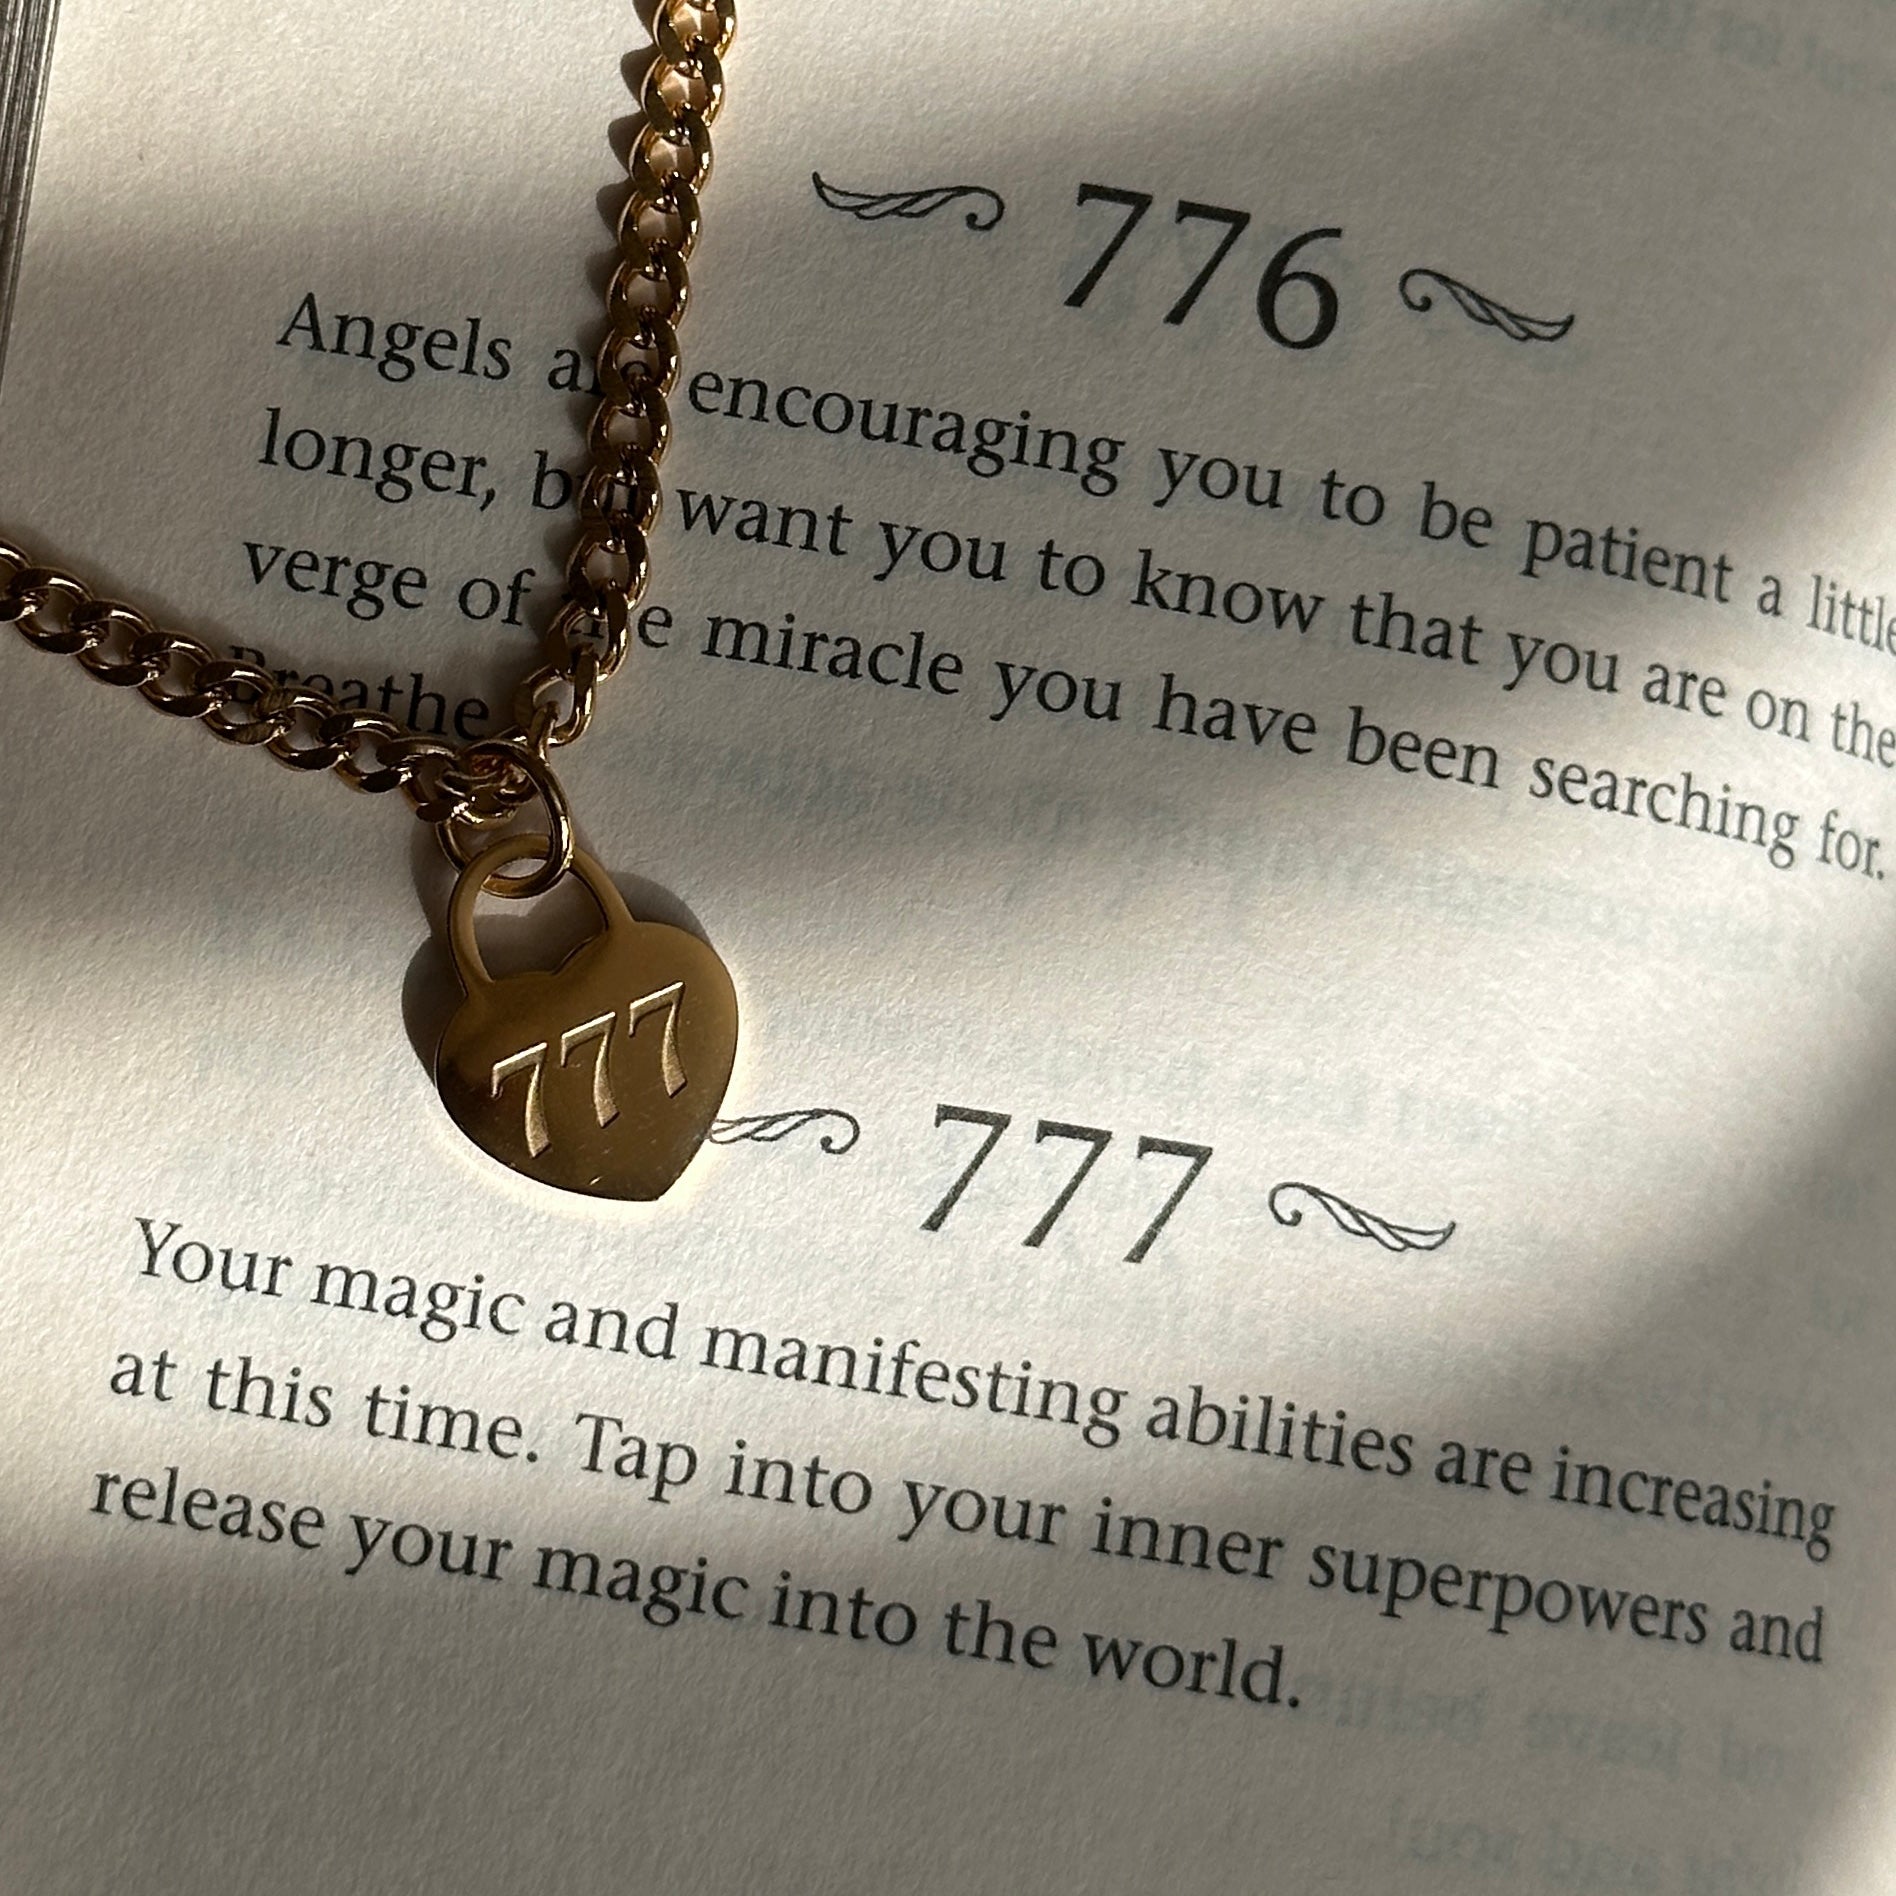 Angel Numbers Necklace - Asanti by Koi